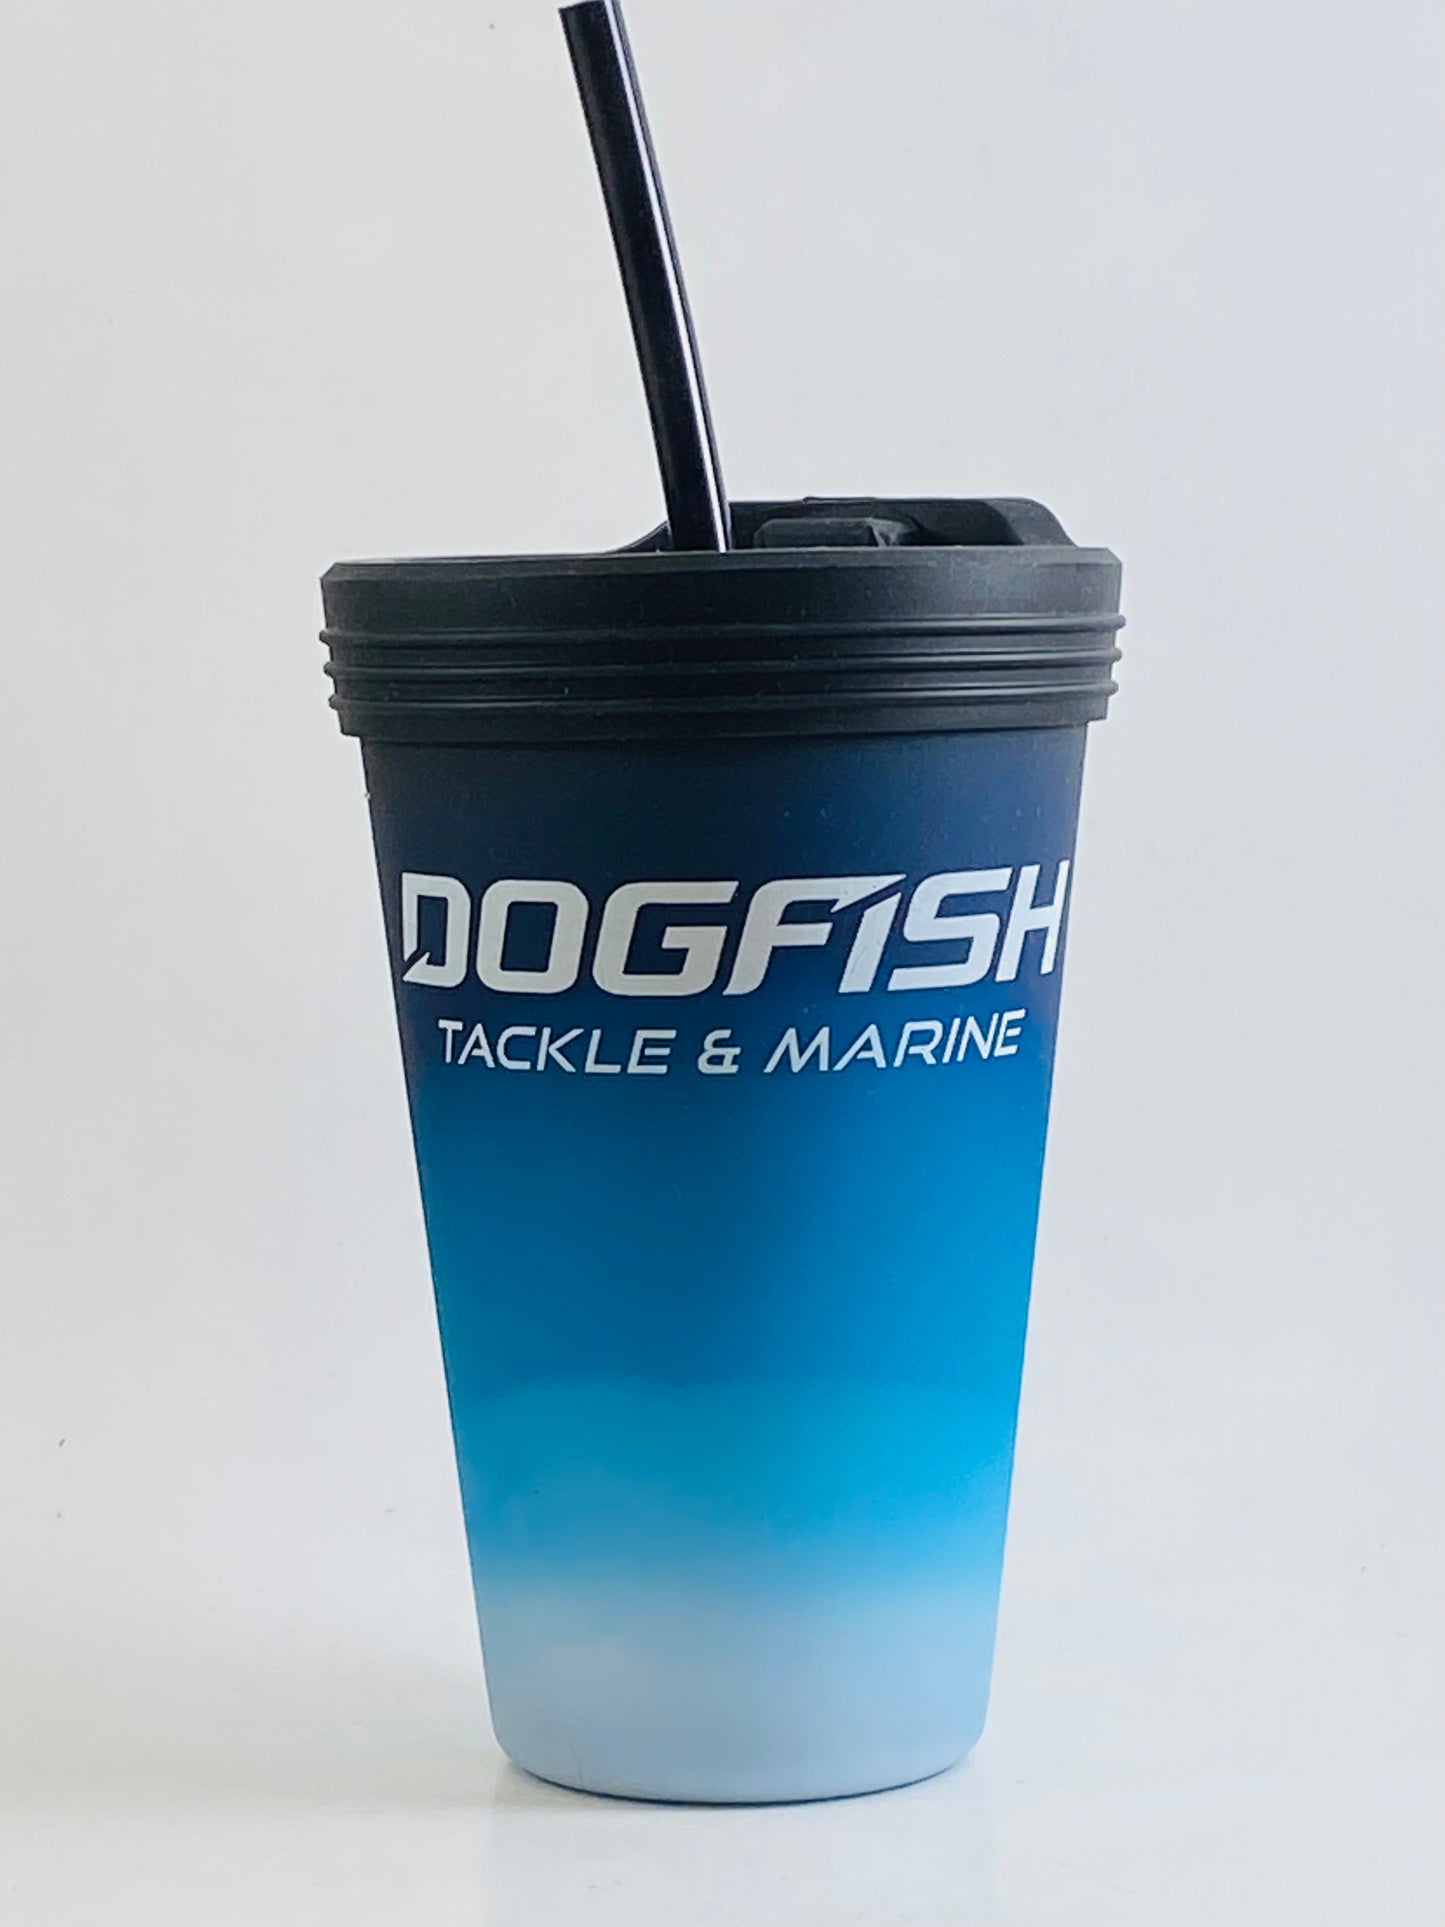 Dogfish Tackle Unbreakable Silipint Cups - Dogfish Tackle & Marine